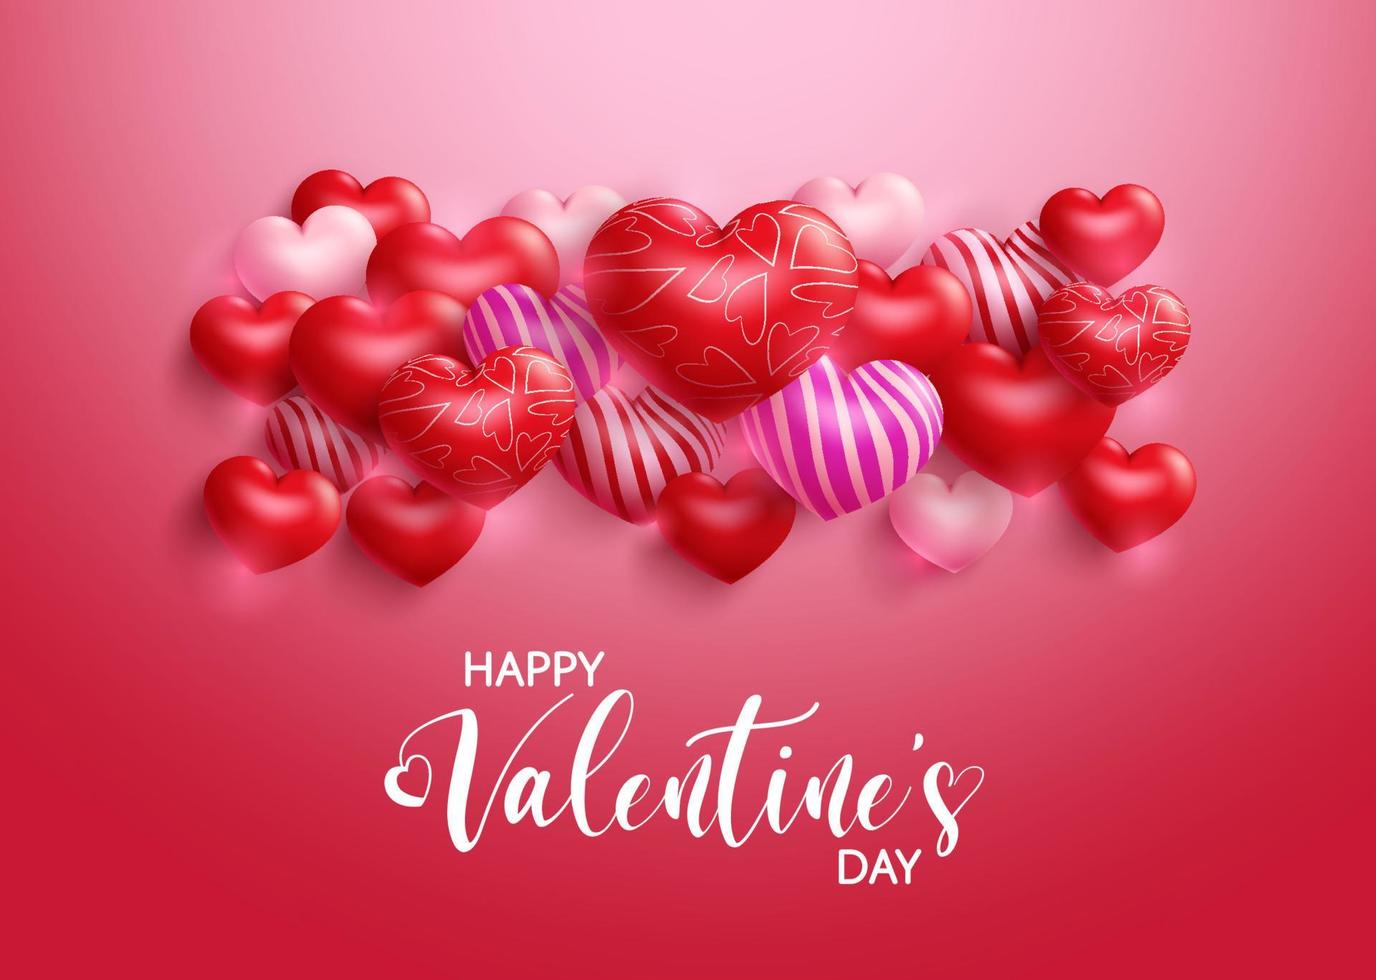 Valentine's day vector background design. Happy valentine's day greeting text with elements of cute 3D heart element with pattern for valentine celebration design. Vector illustration